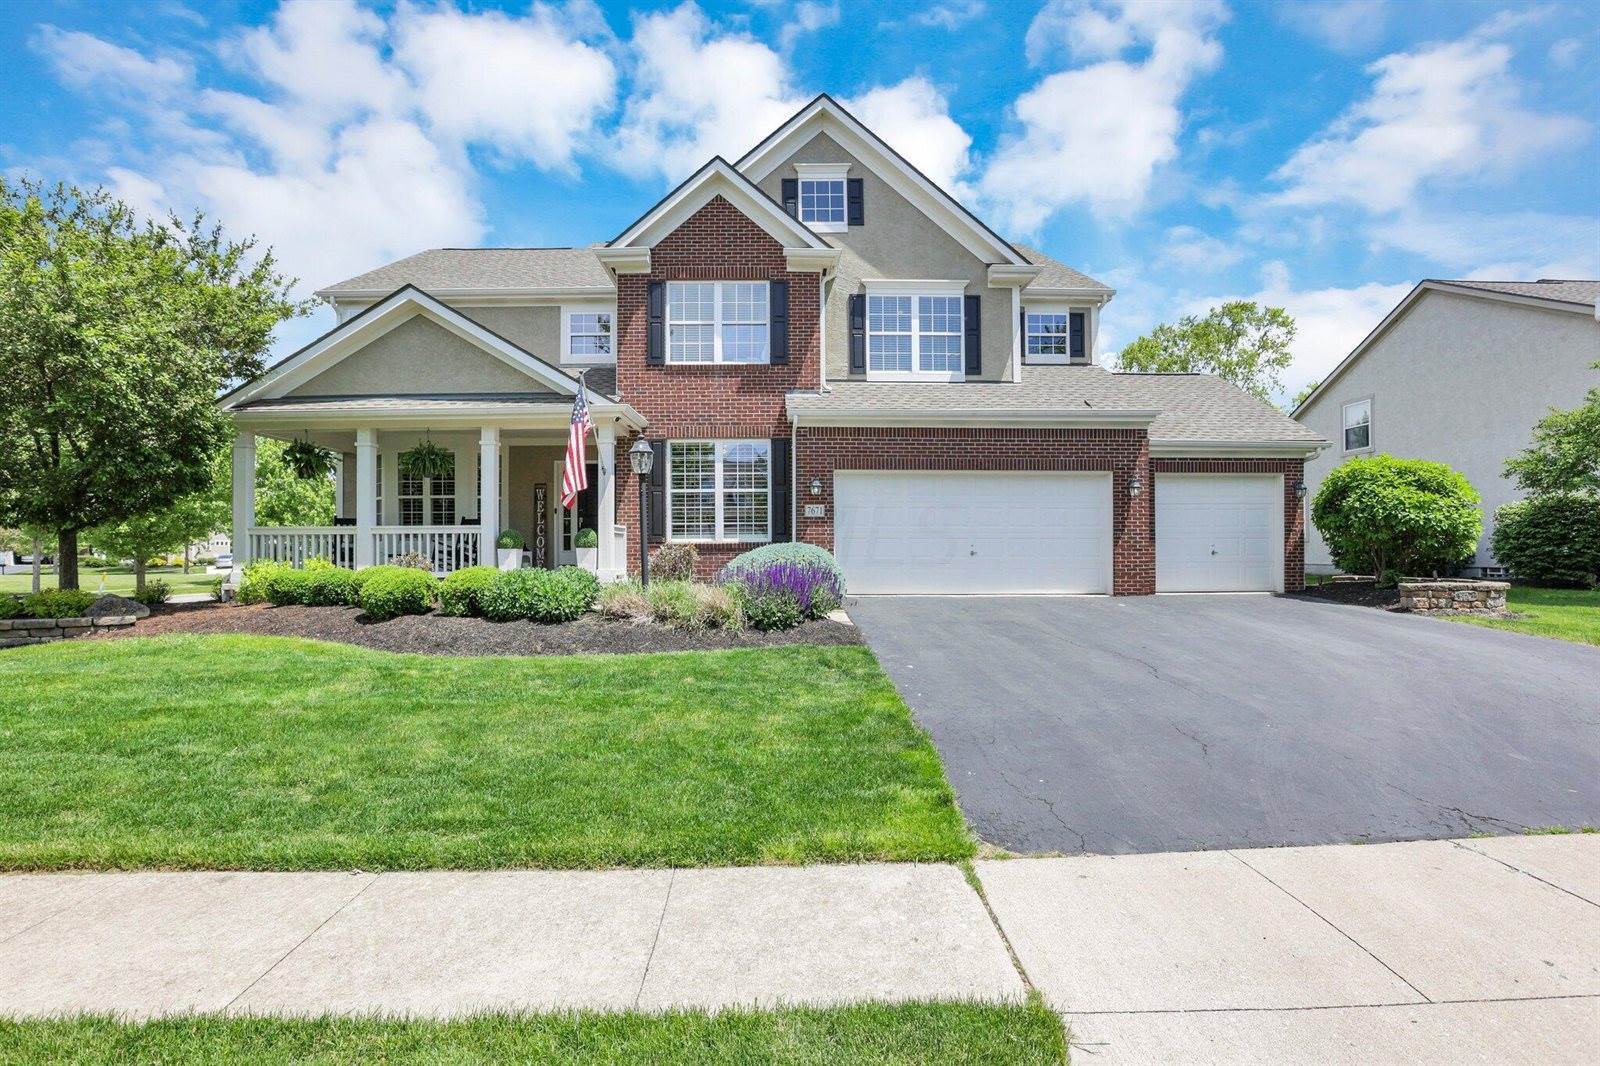 7671 Indian Springs Drive, Powell, OH 43065